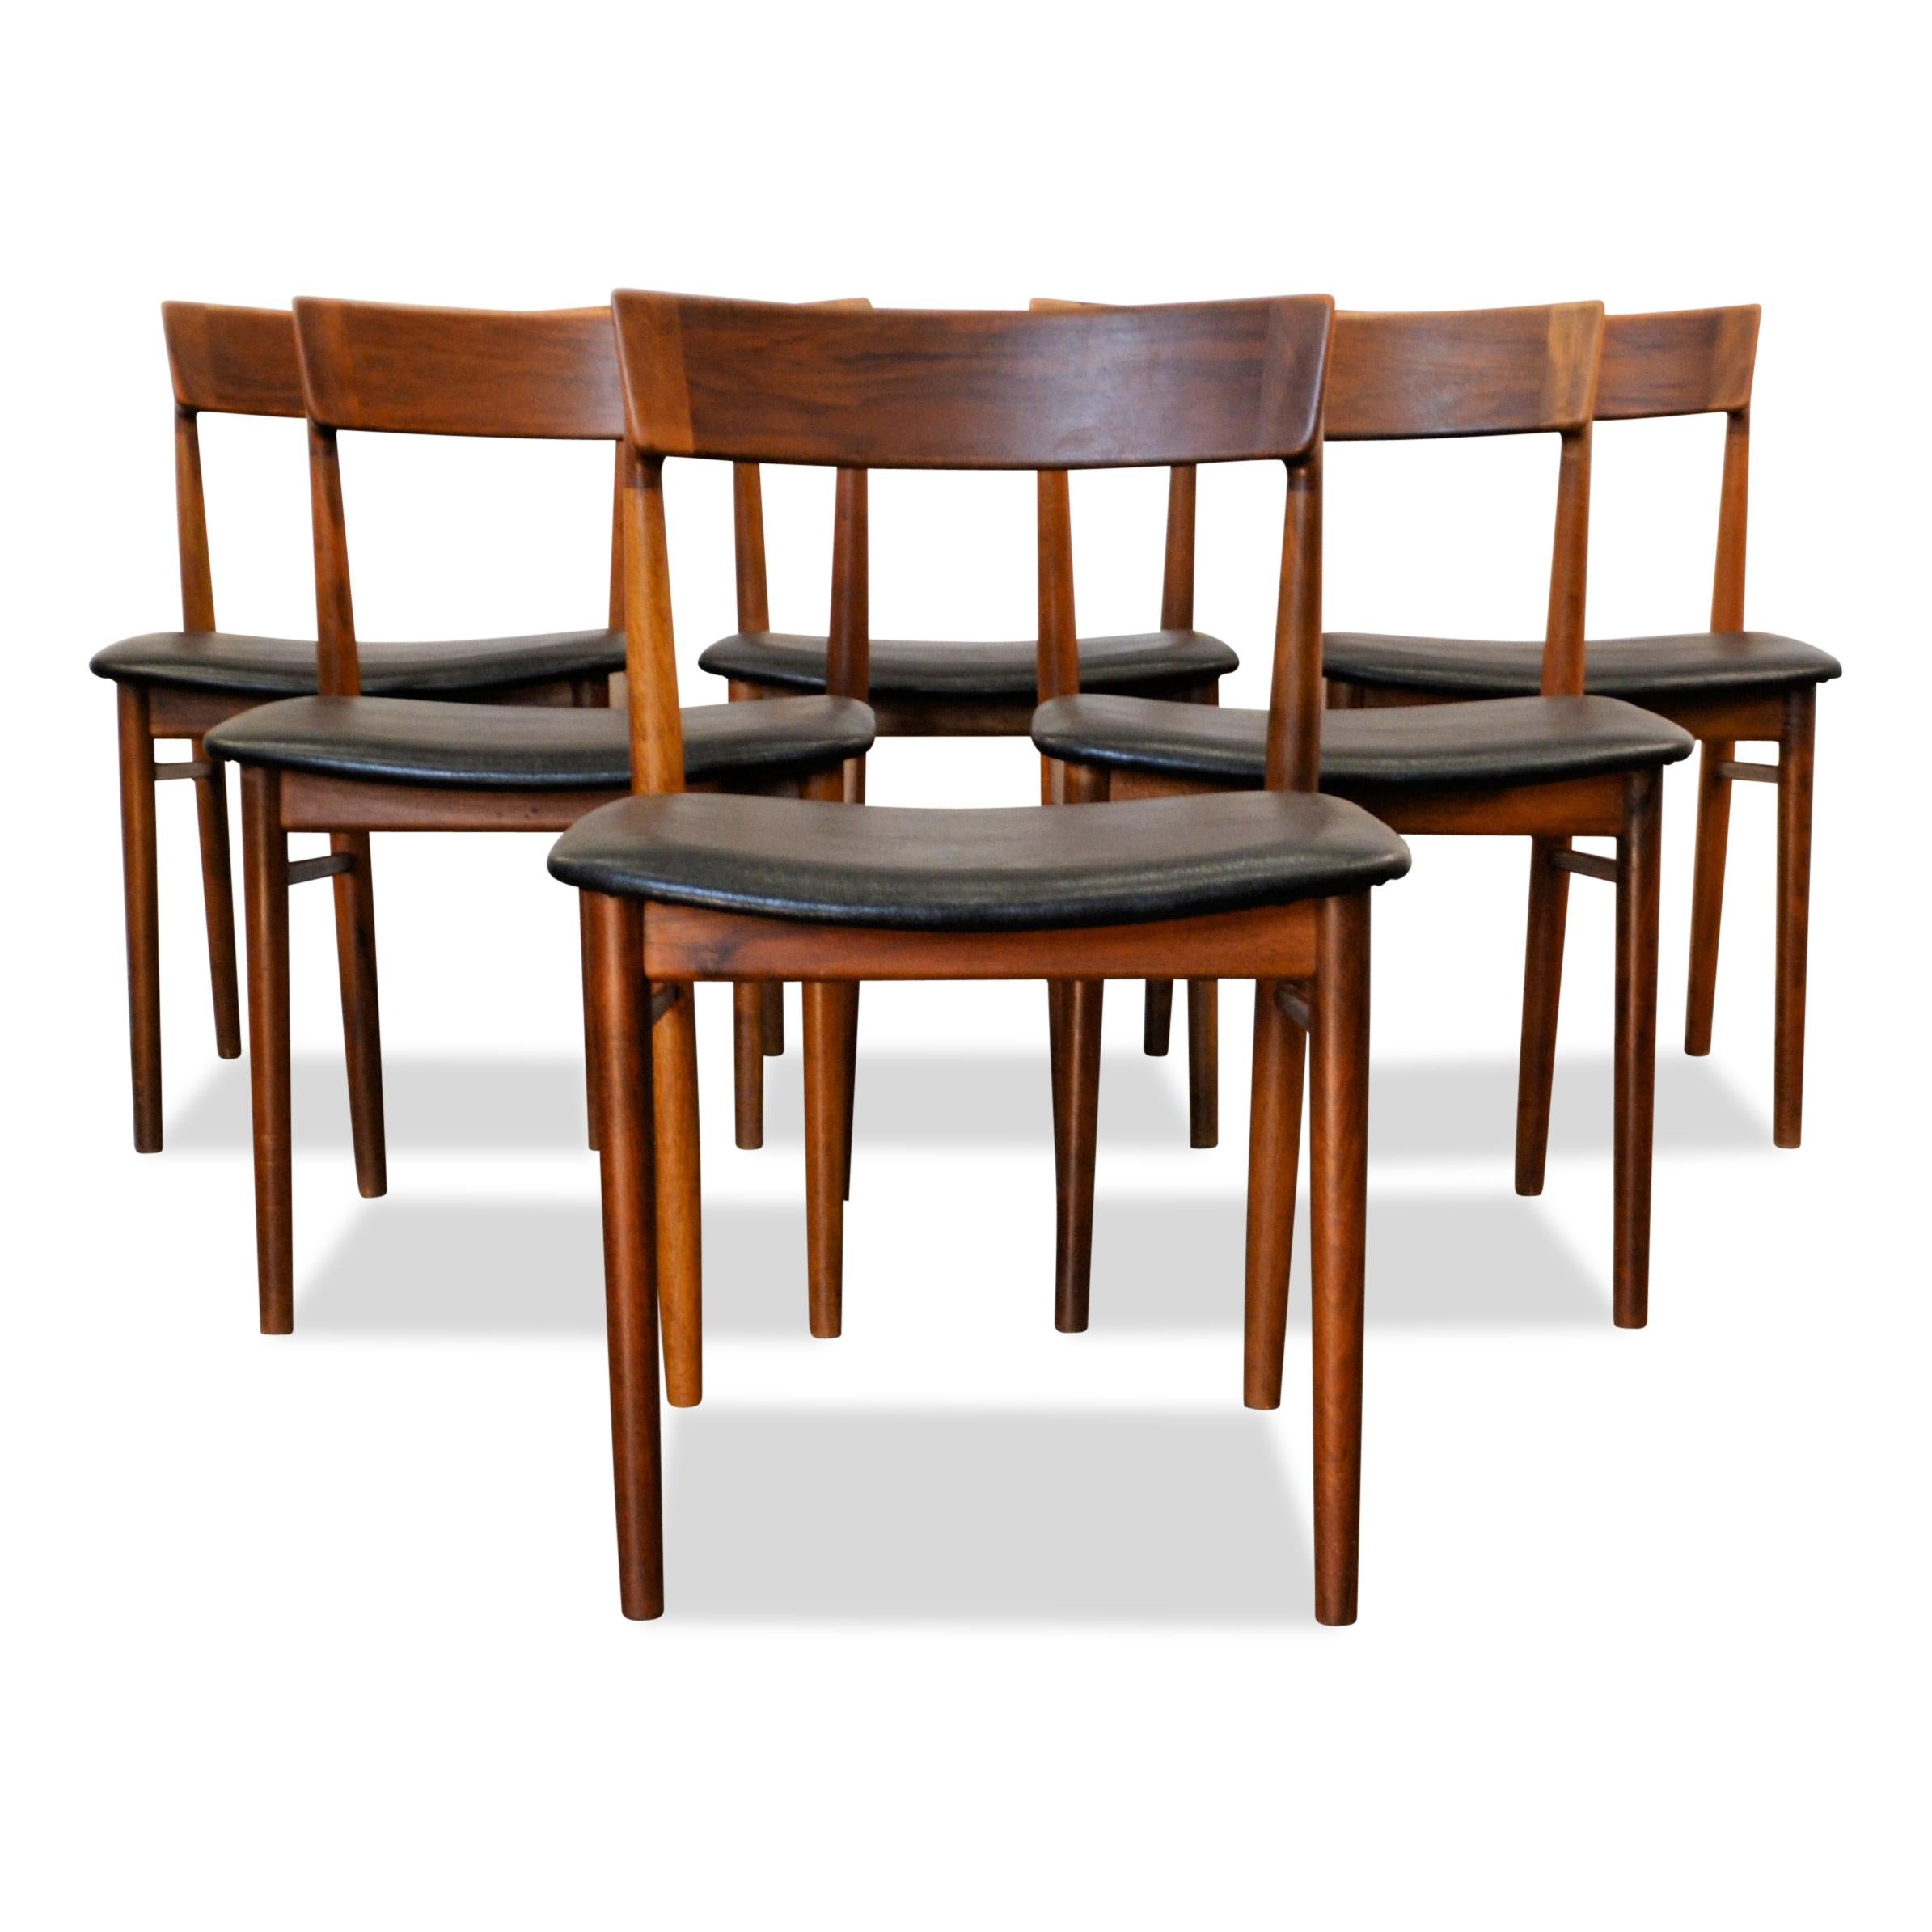 Set of six Danish vintage chairs designed by Henri Rosengren for Brande Møbelindustri. These stylish, high quality design chairs feature a typically Danish organic design, solid teak frames and a beautiful new black skai leather upholstery and new